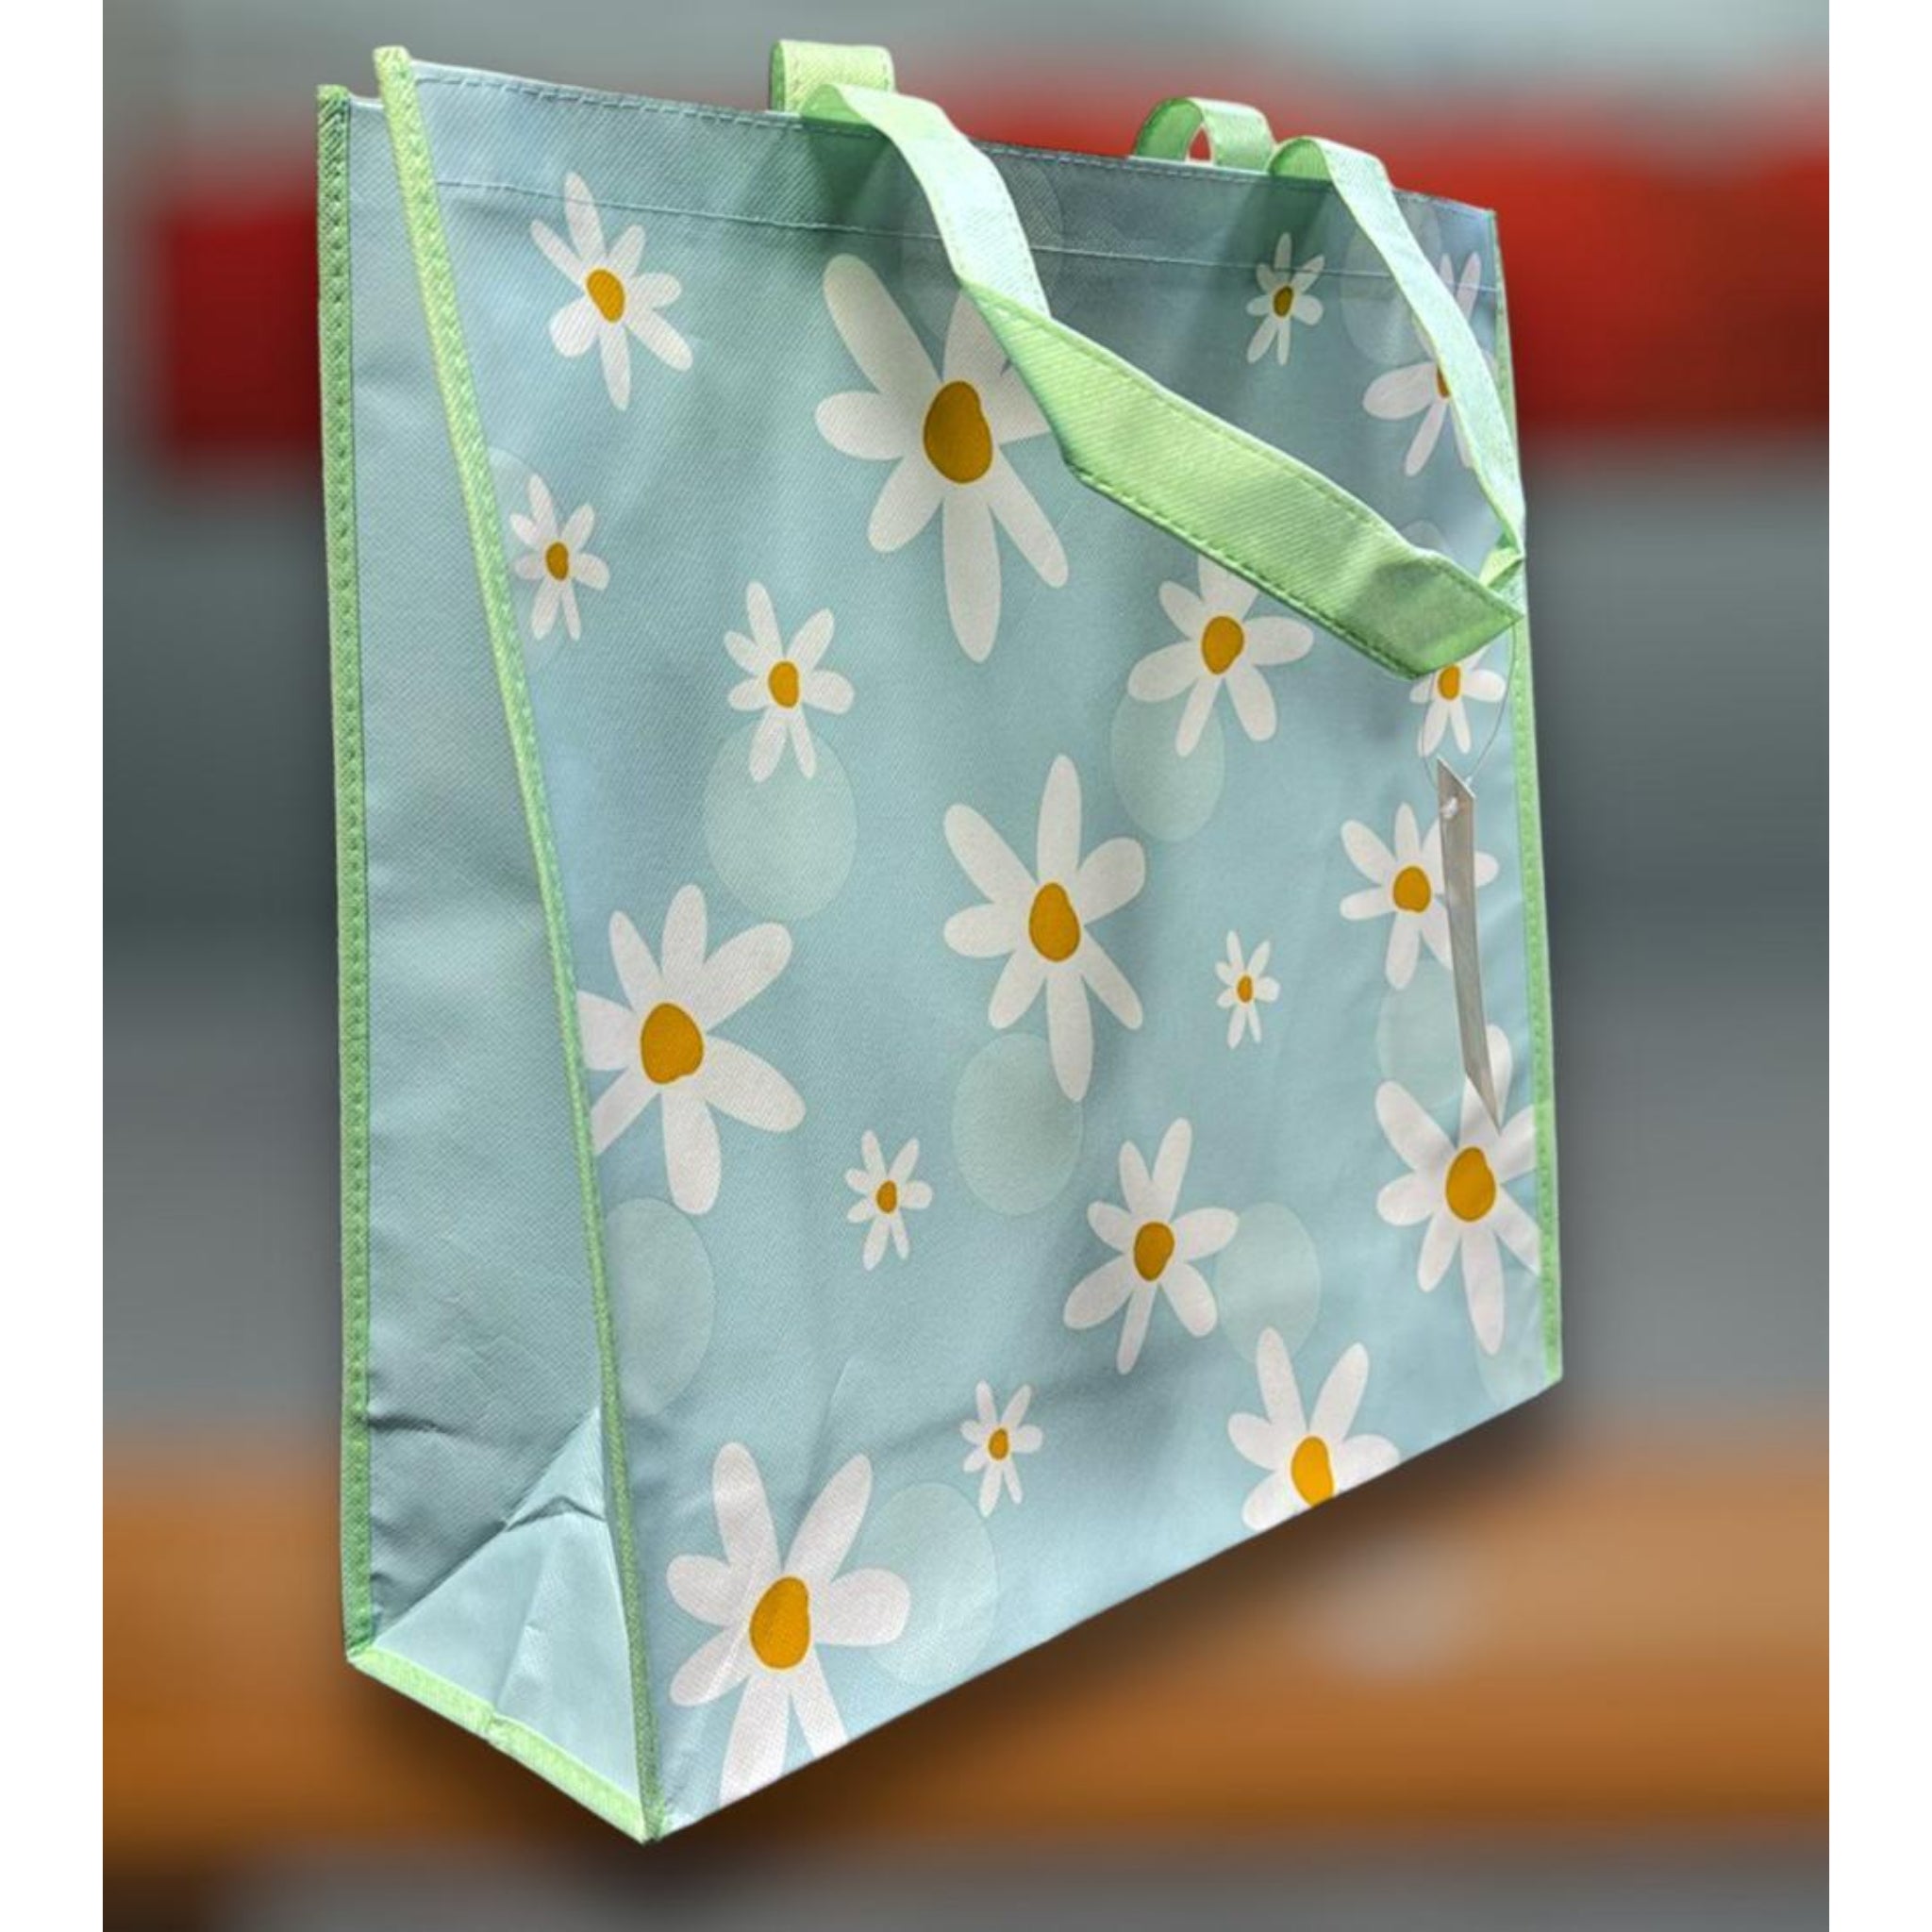 Beclen Harp 2 x Easter Christmas Gift Bags Tote Bag Non Woven Fabric Gift Party Present Bags